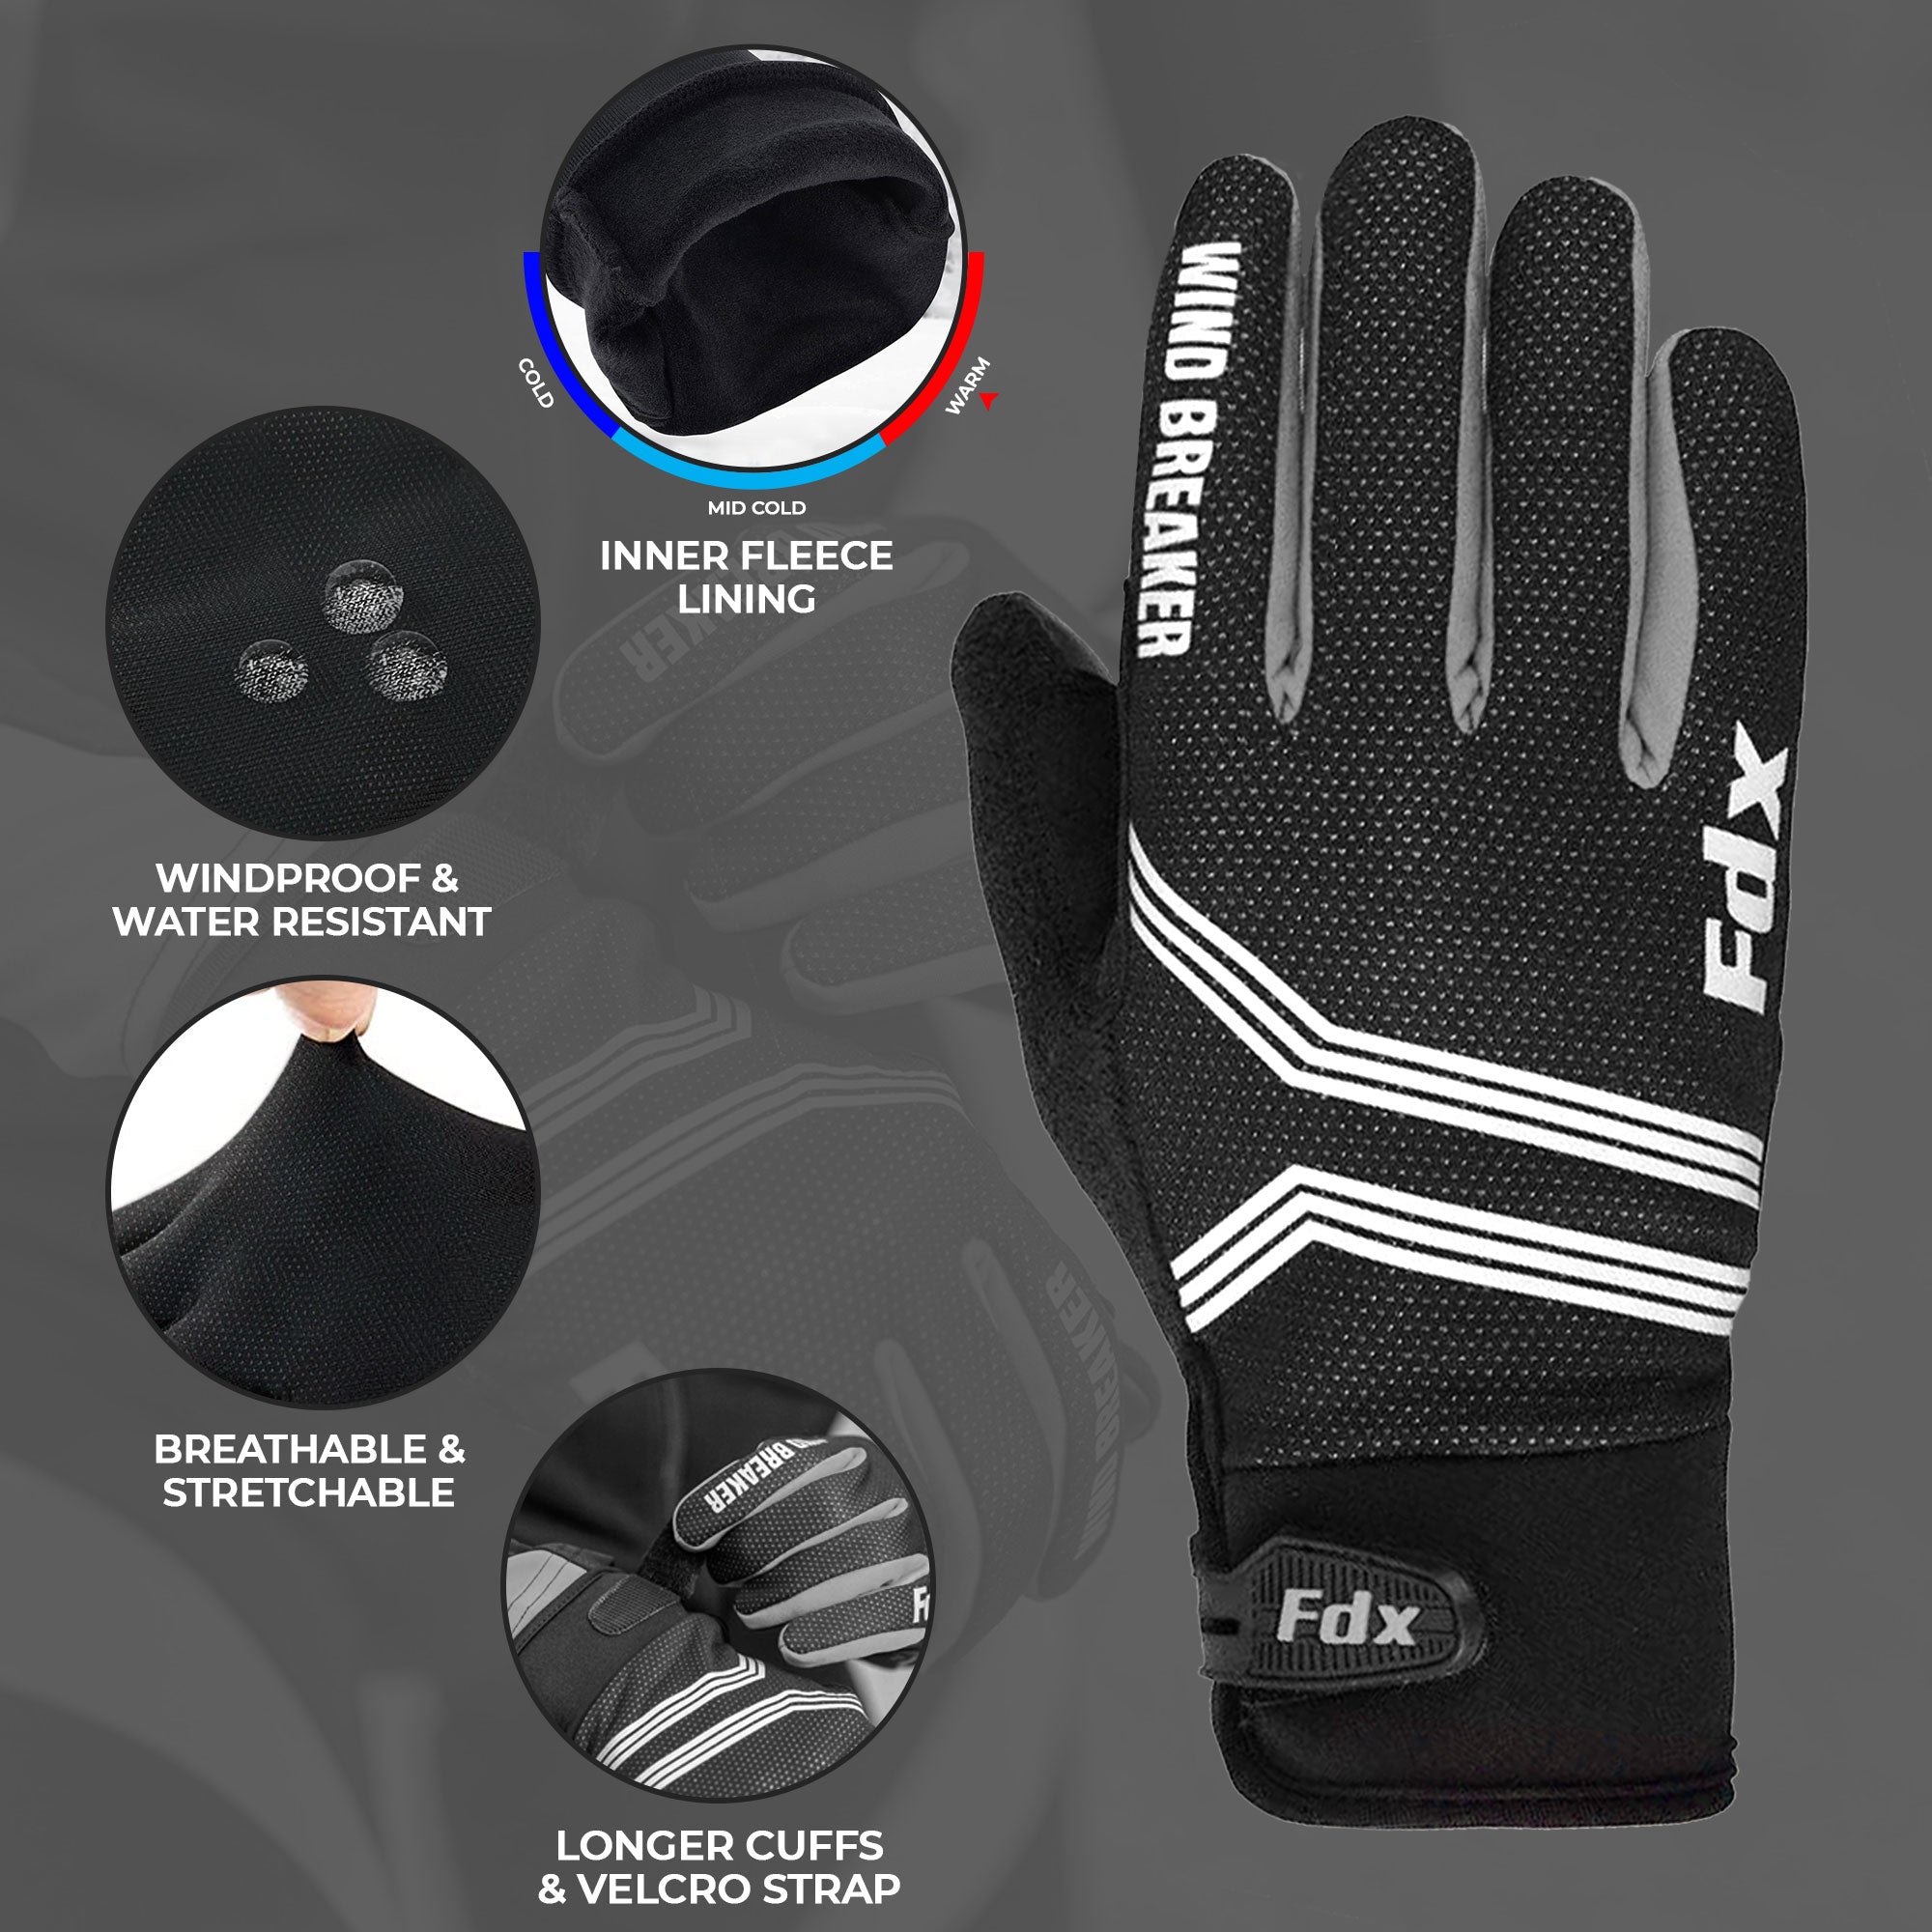 Fdx Black Full Finger Cycling Gloves for Winter MTB Road Bike Reflective Thermal & Touch Screen - Dryrest